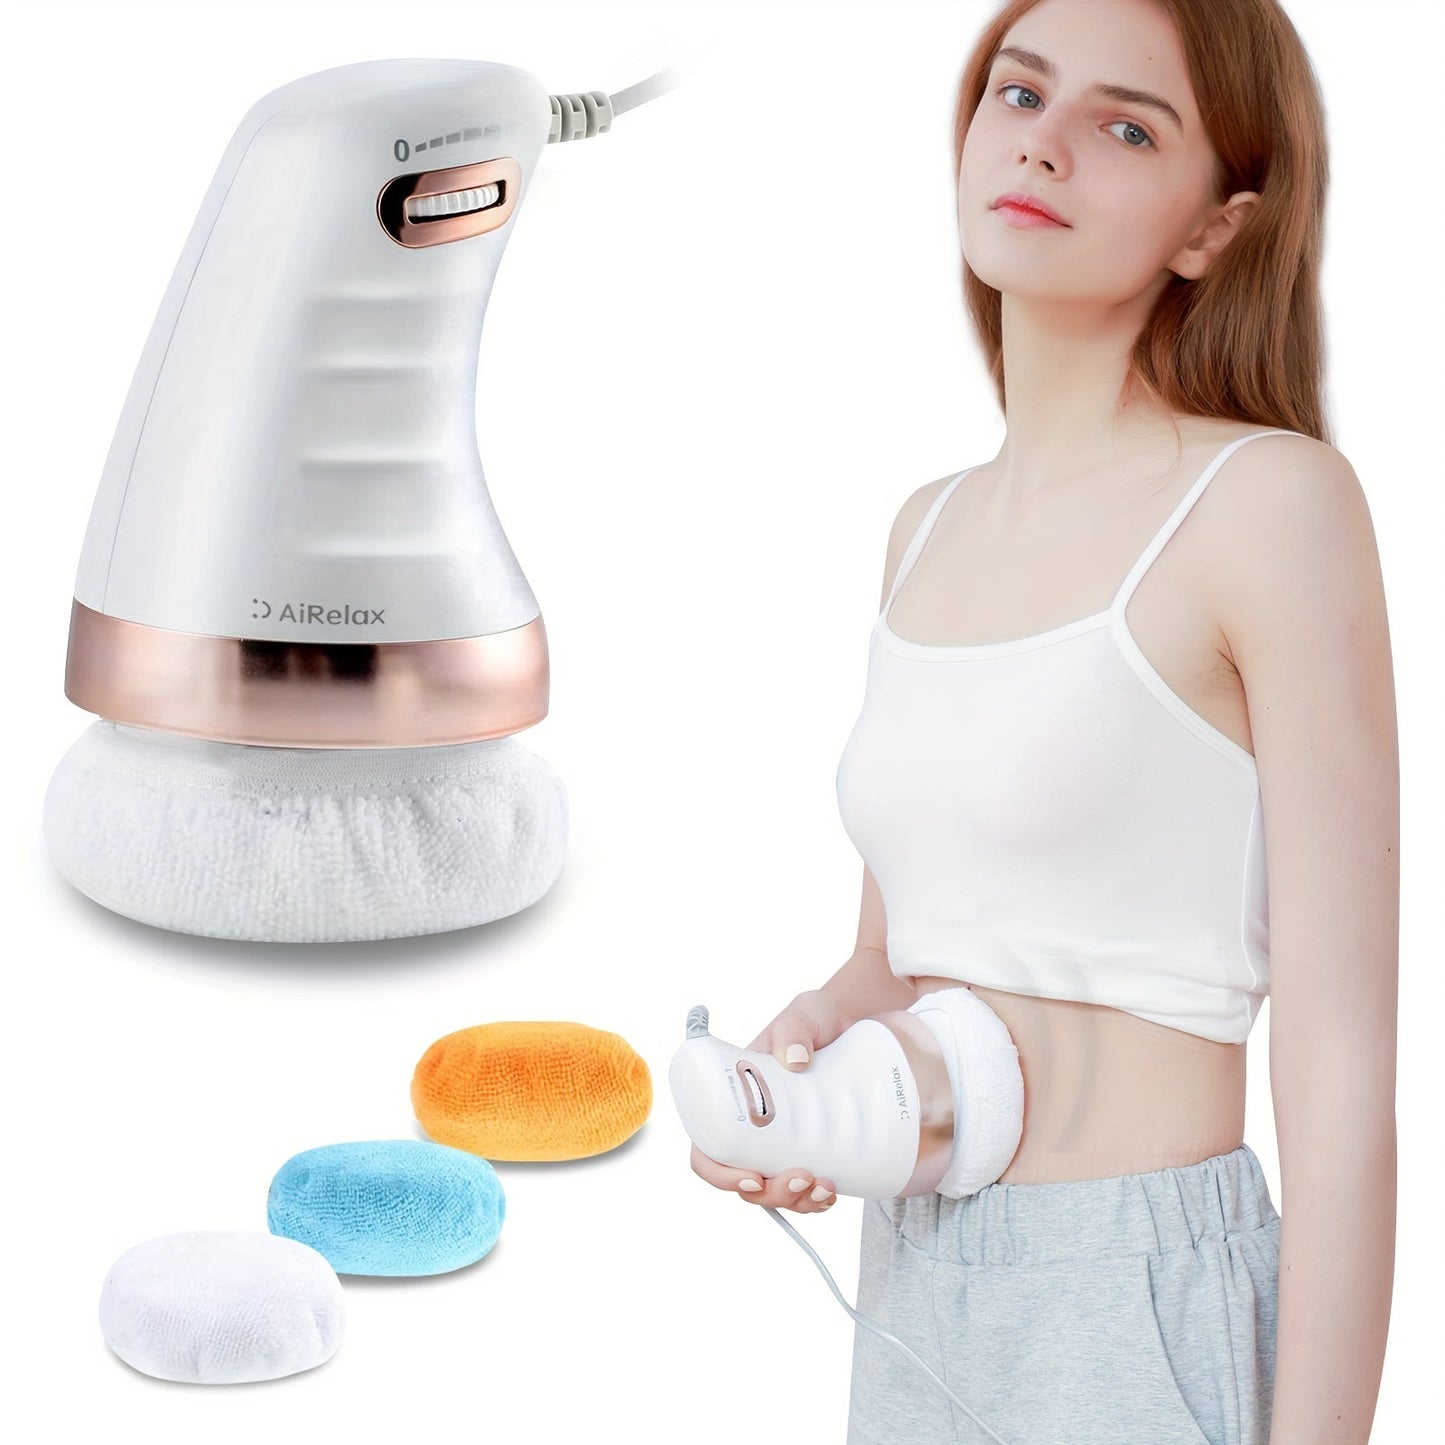 Lomotec 1pc Cellulite Massager: Handheld Electric Body Massager for Skin Tightening, Belly Waist, Butt, Arms & Legs